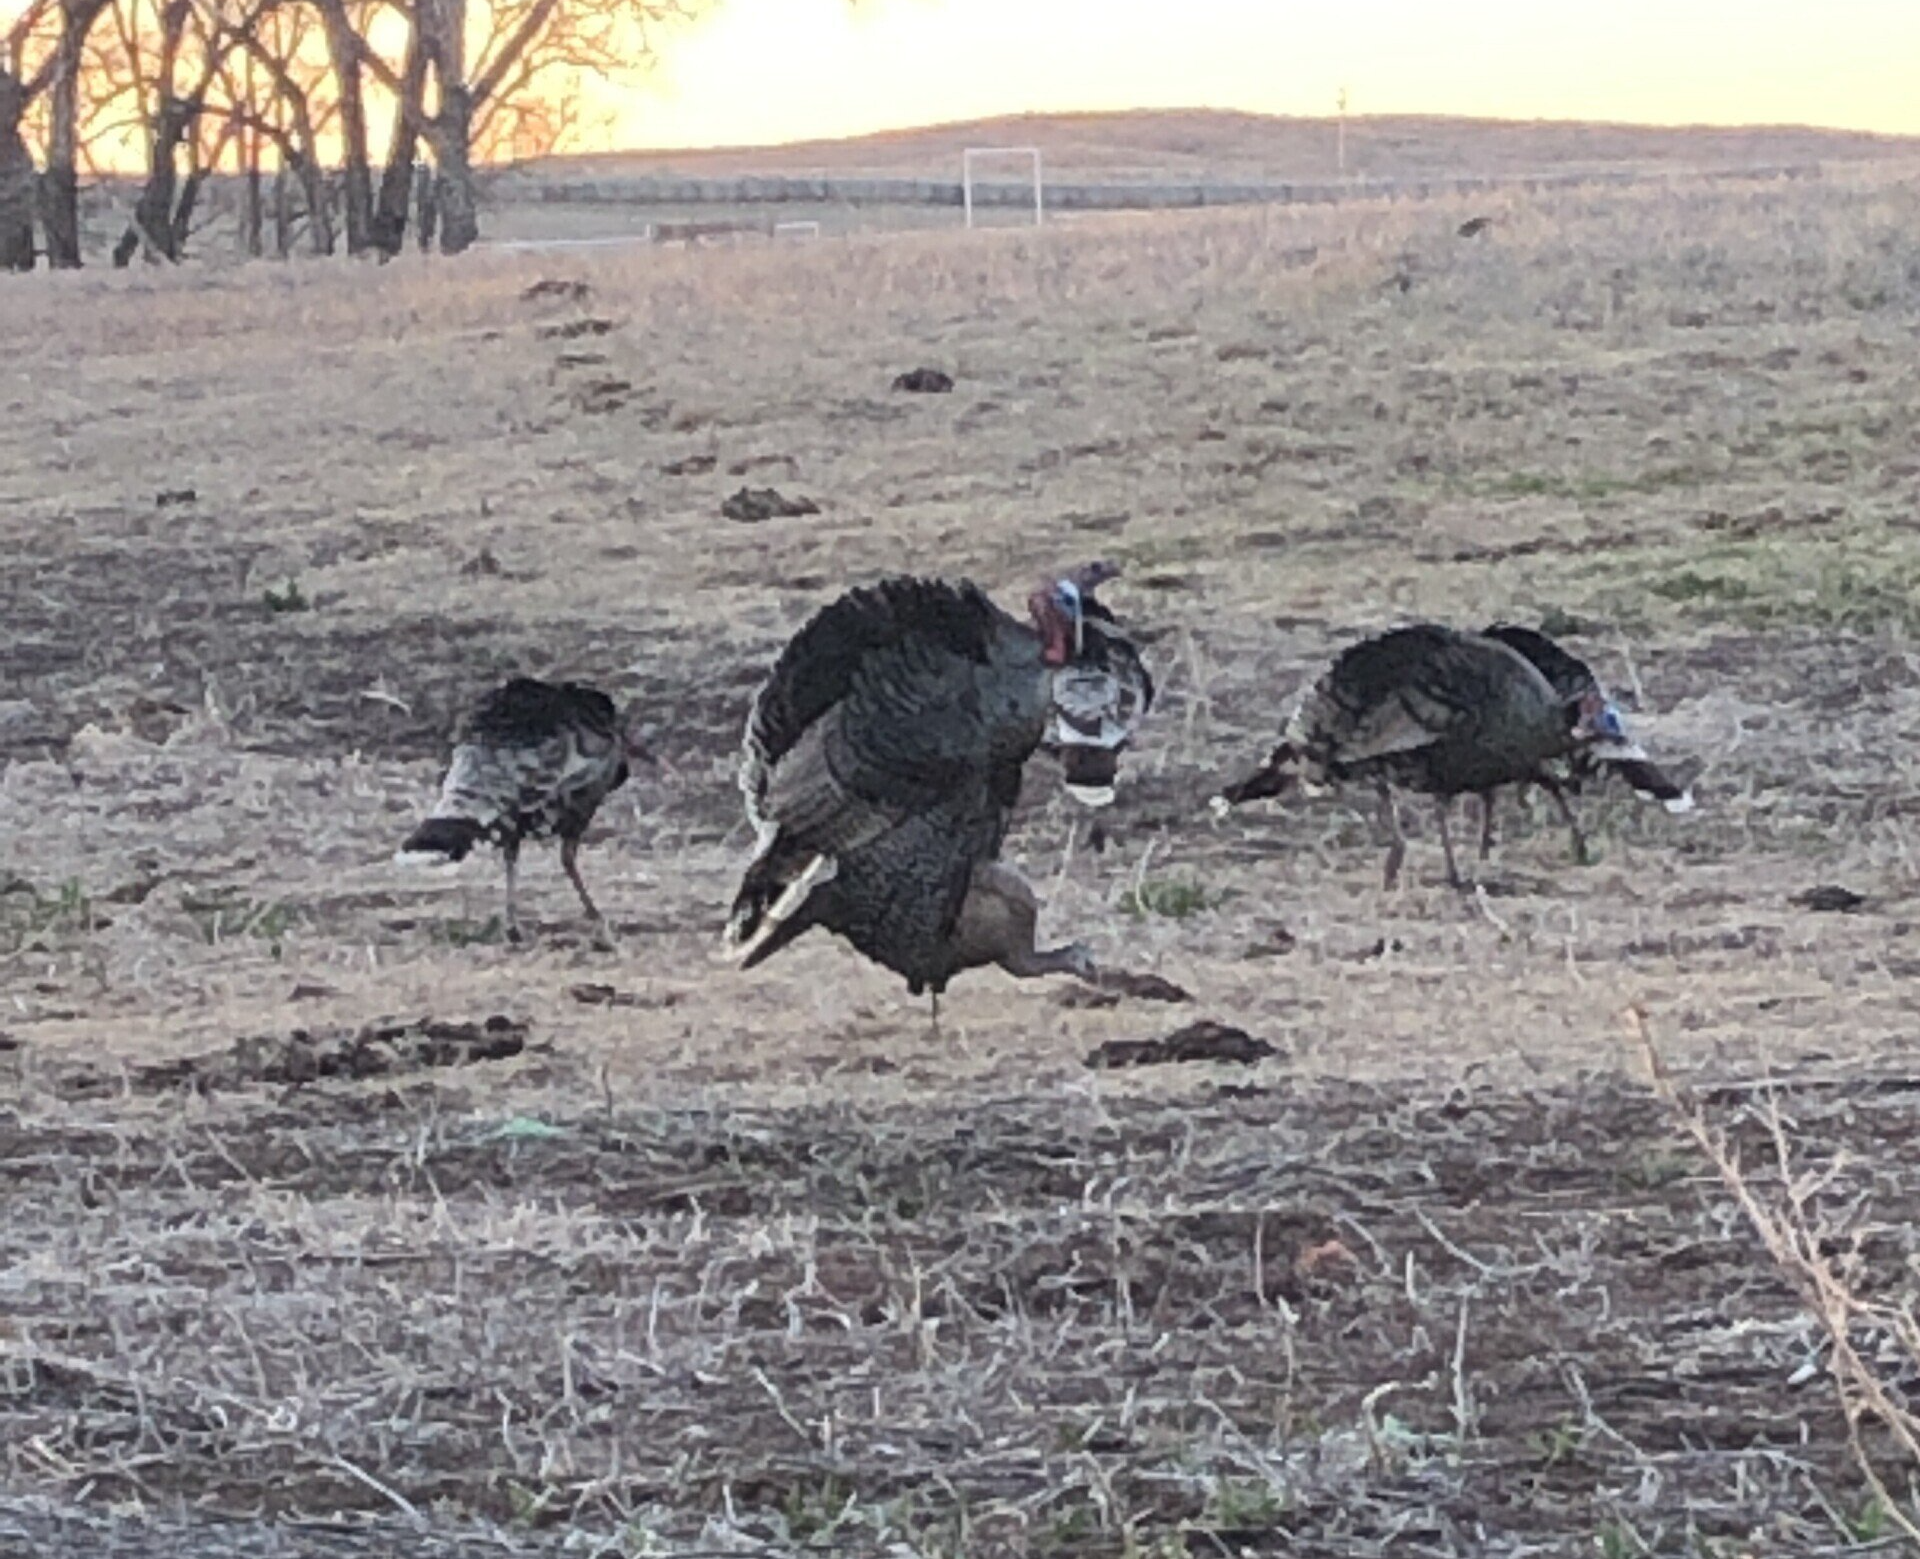 A group of turkeys are standing in a field.